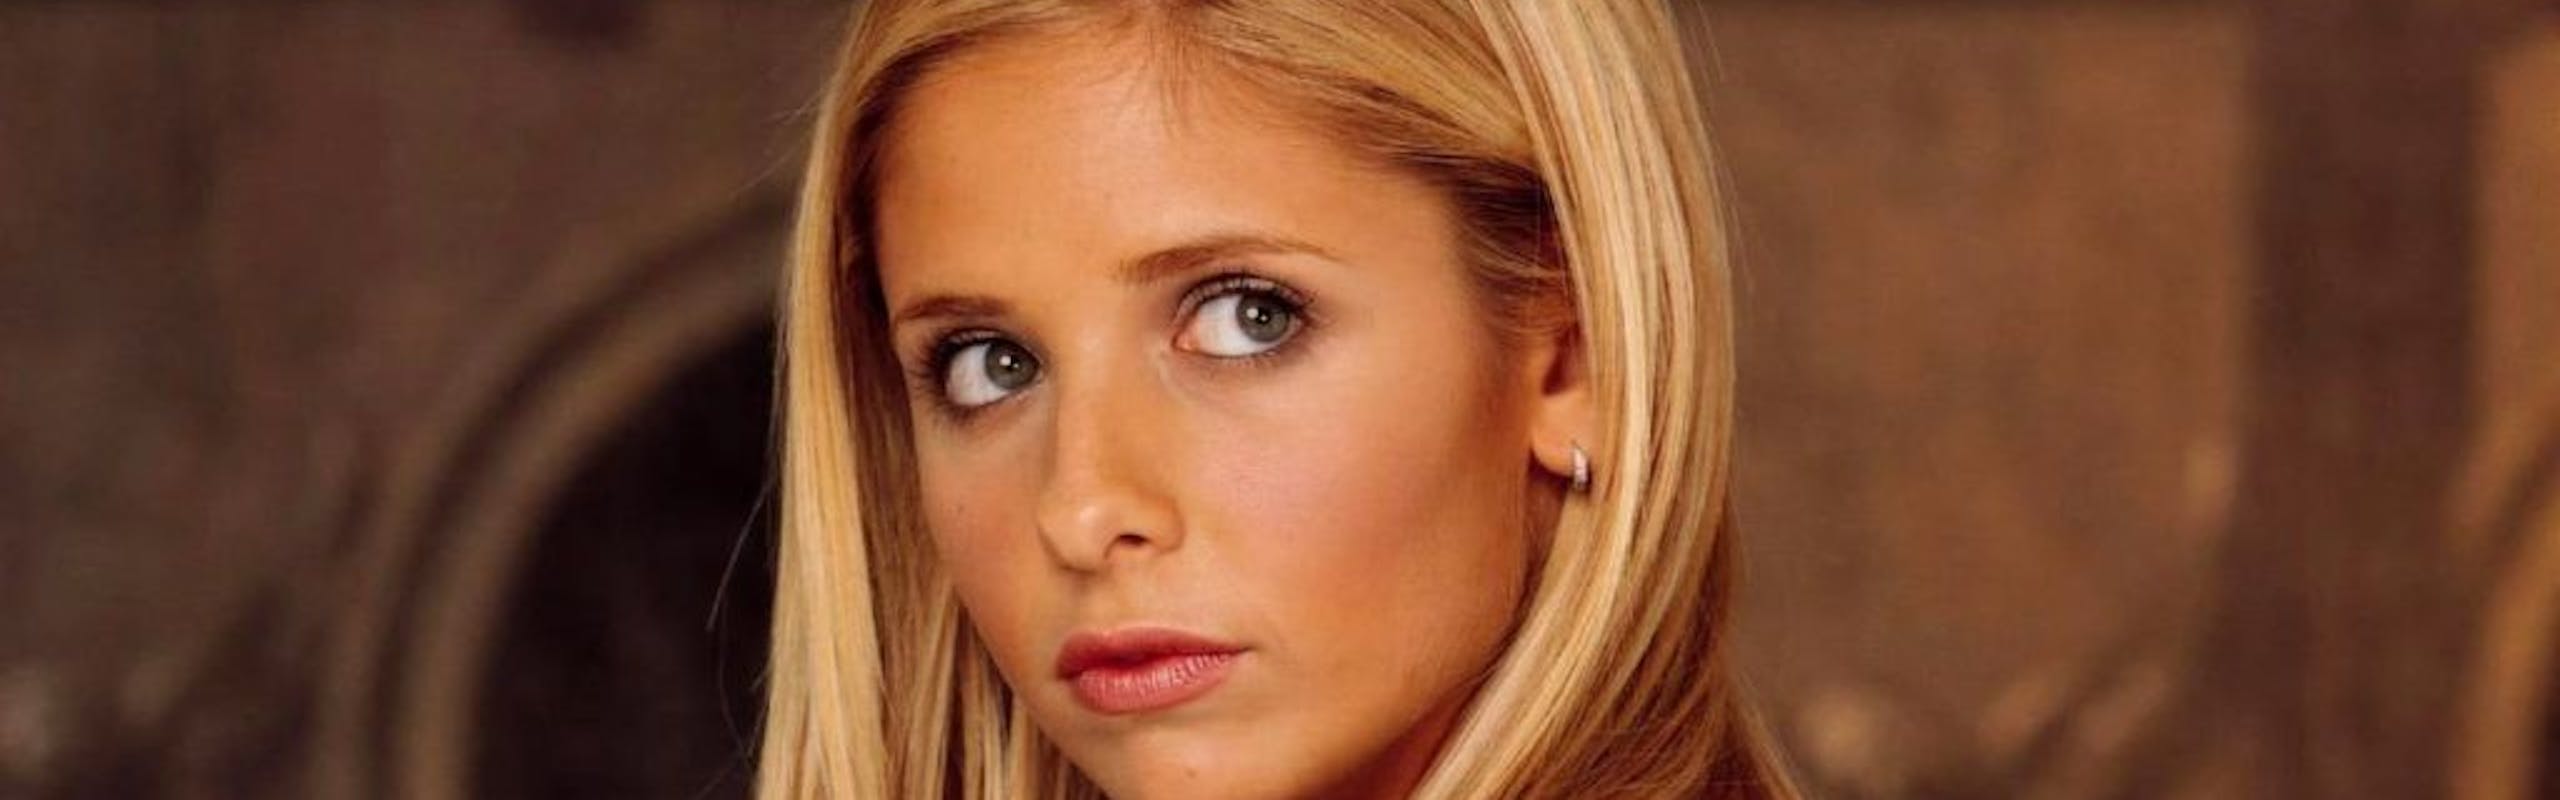 Sarah Michelle Gellar wears a white long sleeve top for her role as Buffy the Vampire Slayer.